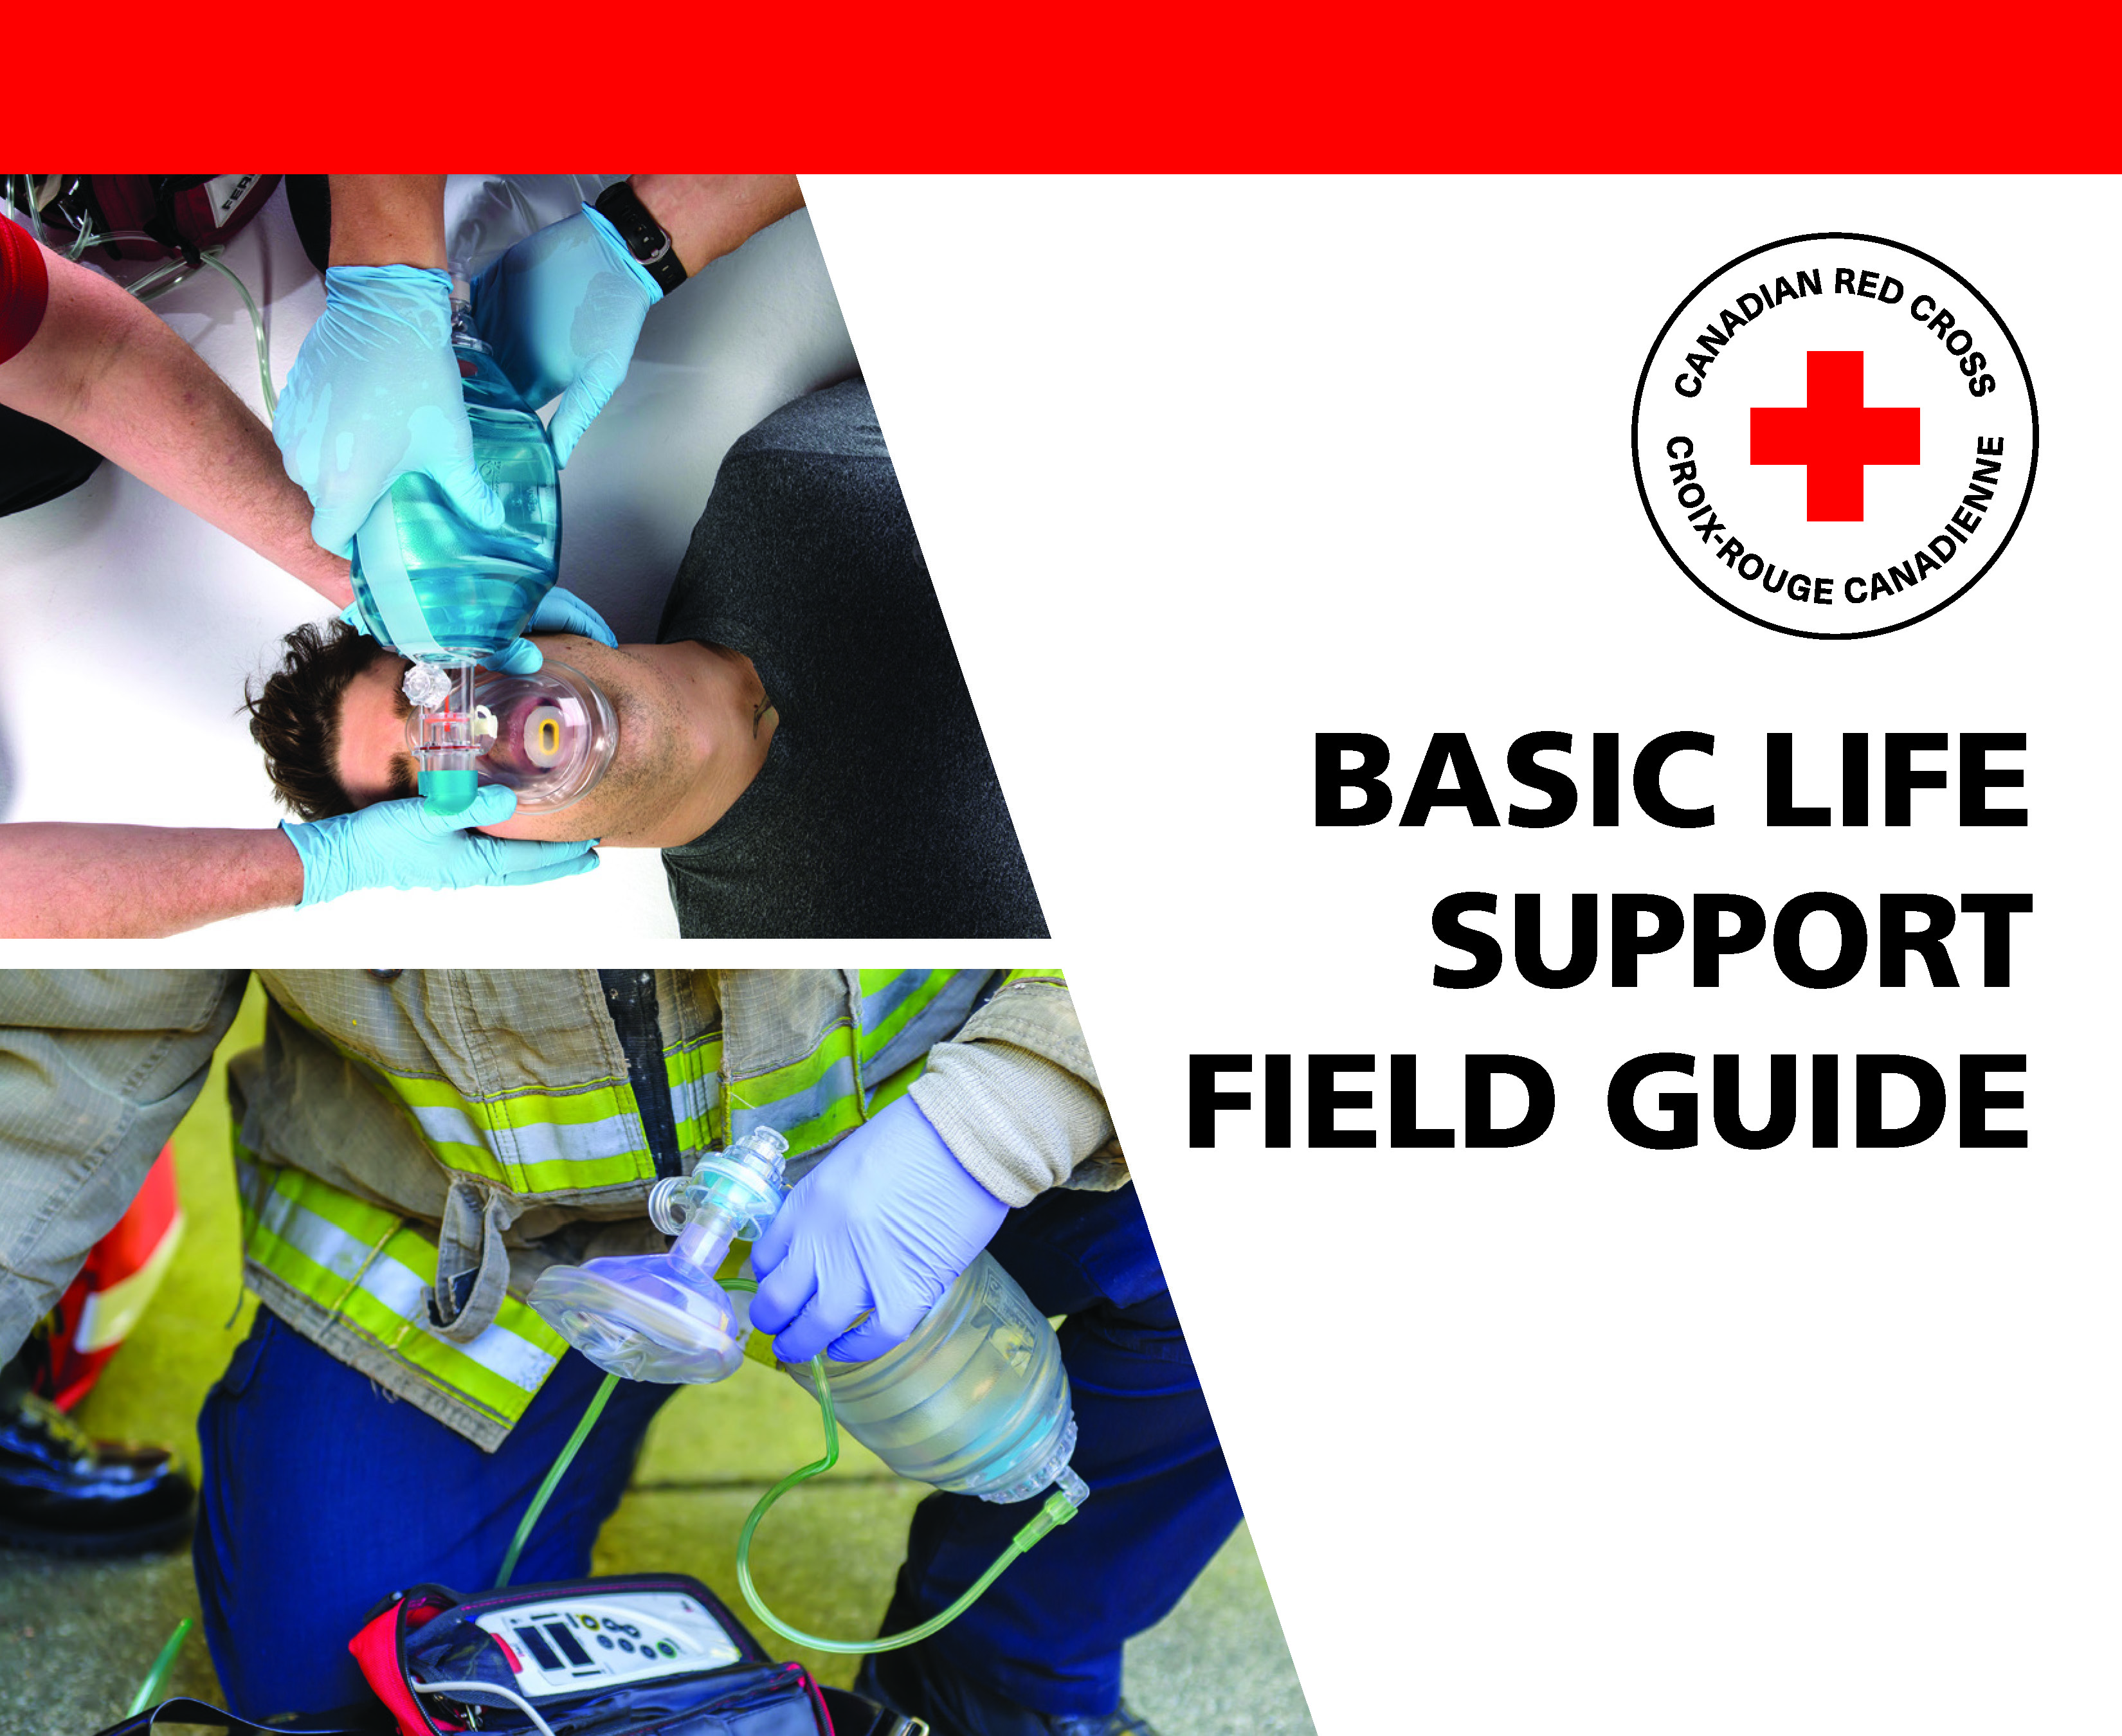 First Aid Course Materials for Basic Life Support